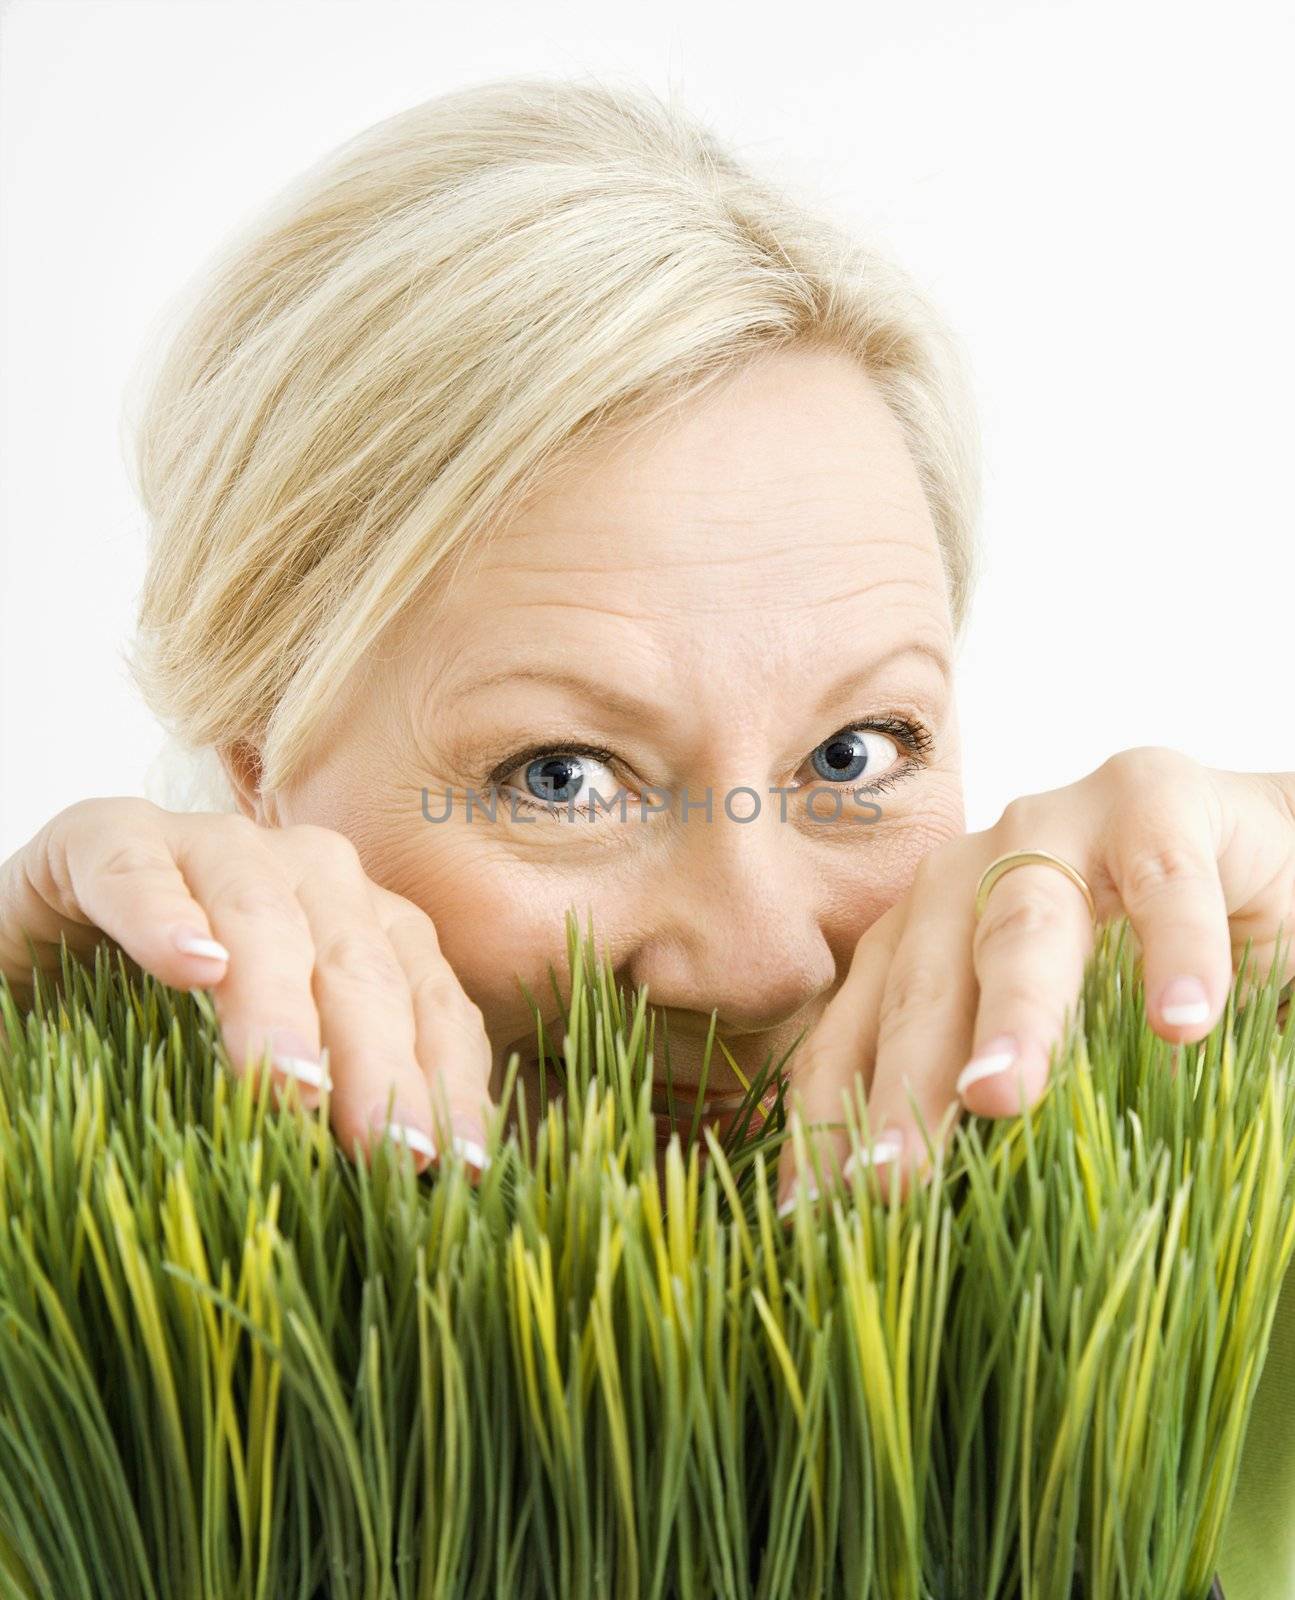 Portrait of adult blonde woman looking through grass at viewer.